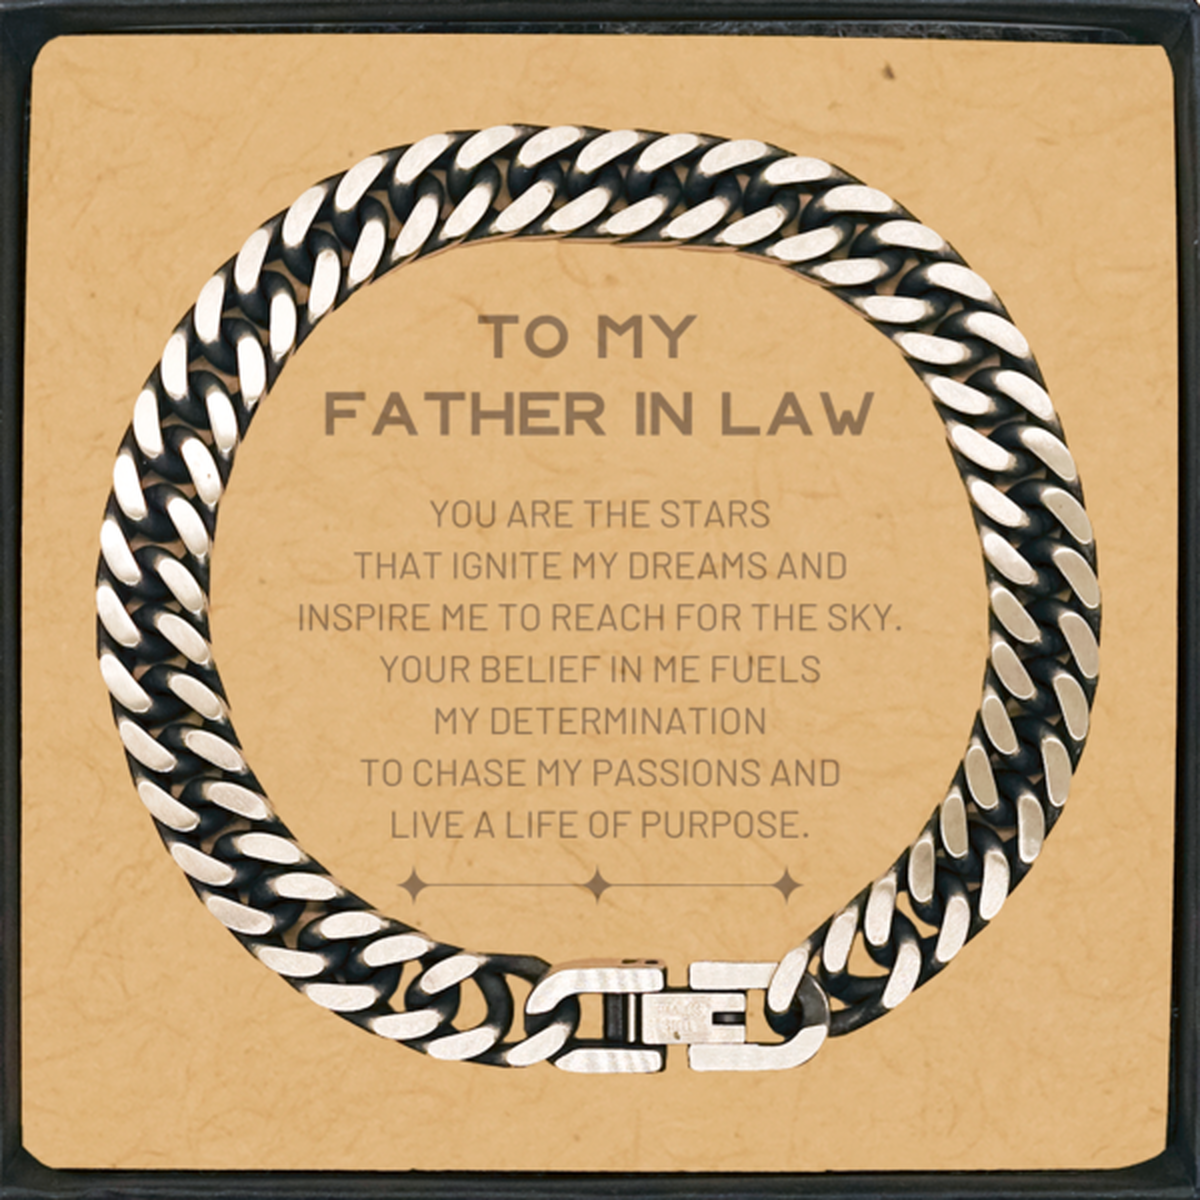 To My Father In Law Cuban Link Chain Bracelet, You are the stars that ignite my dreams and inspire me to reach for the sky, Birthday Unique Gifts For Father In Law, Thank You Gifts For Father In Law